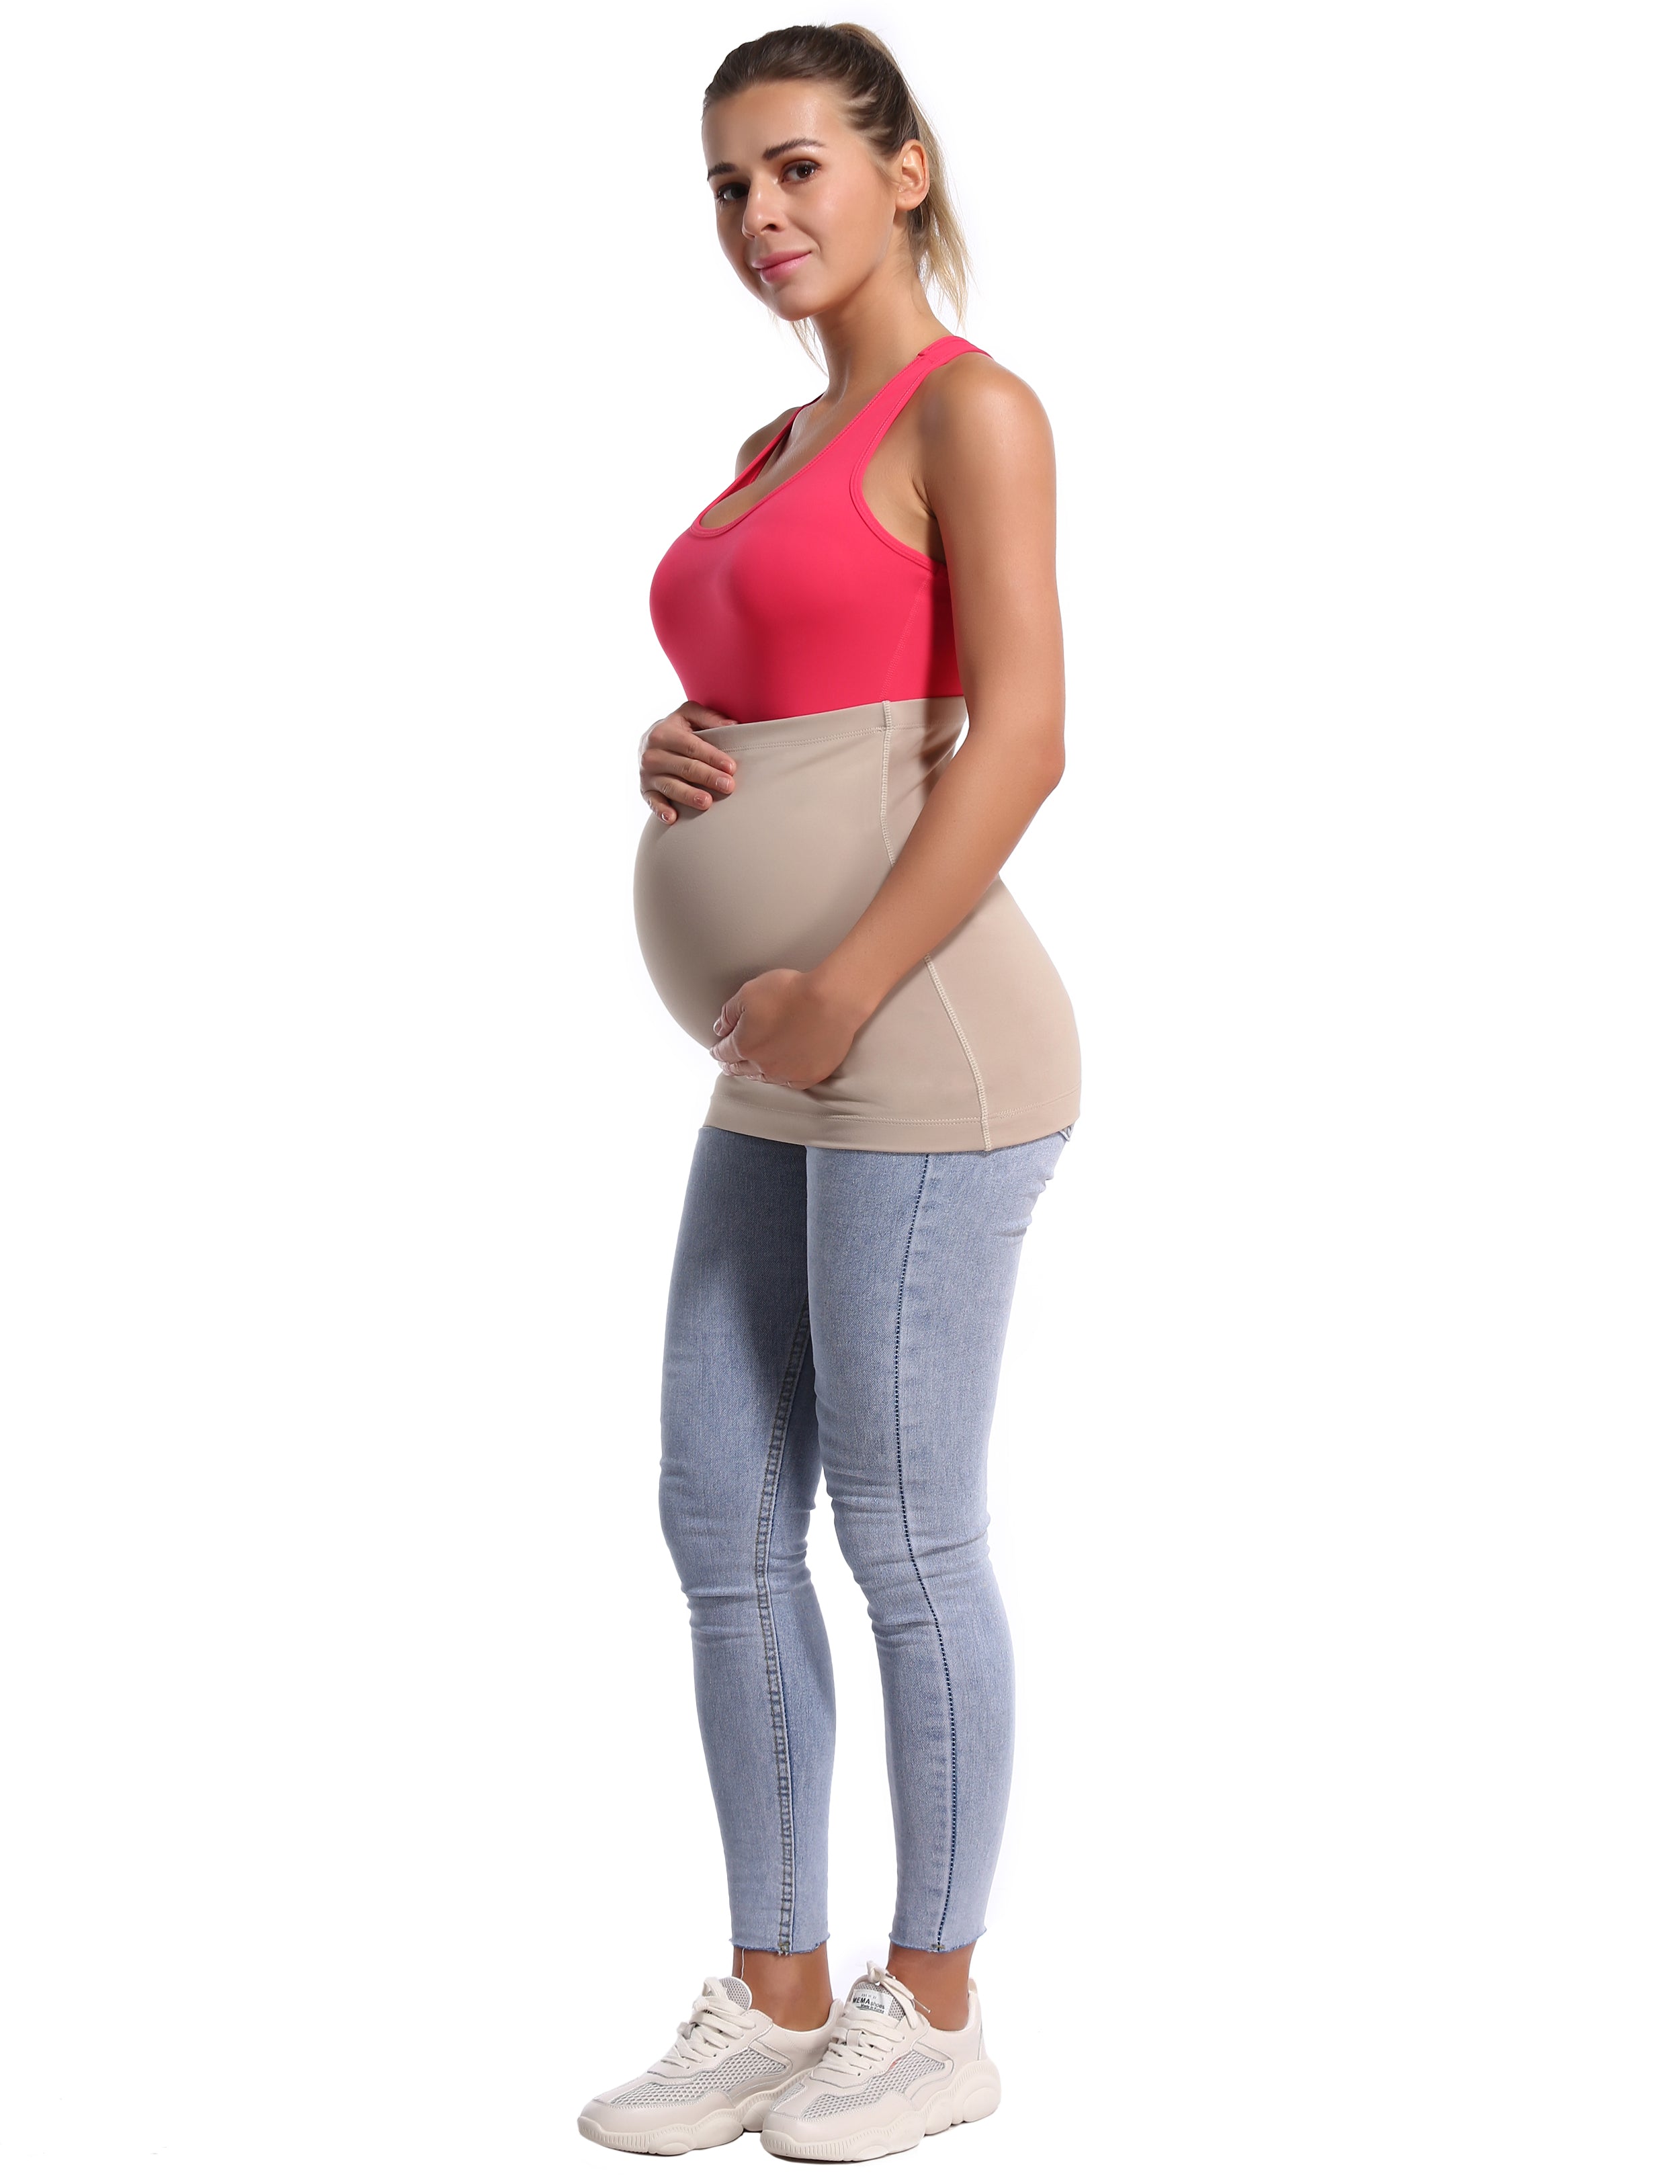 Maternity Belly Bands